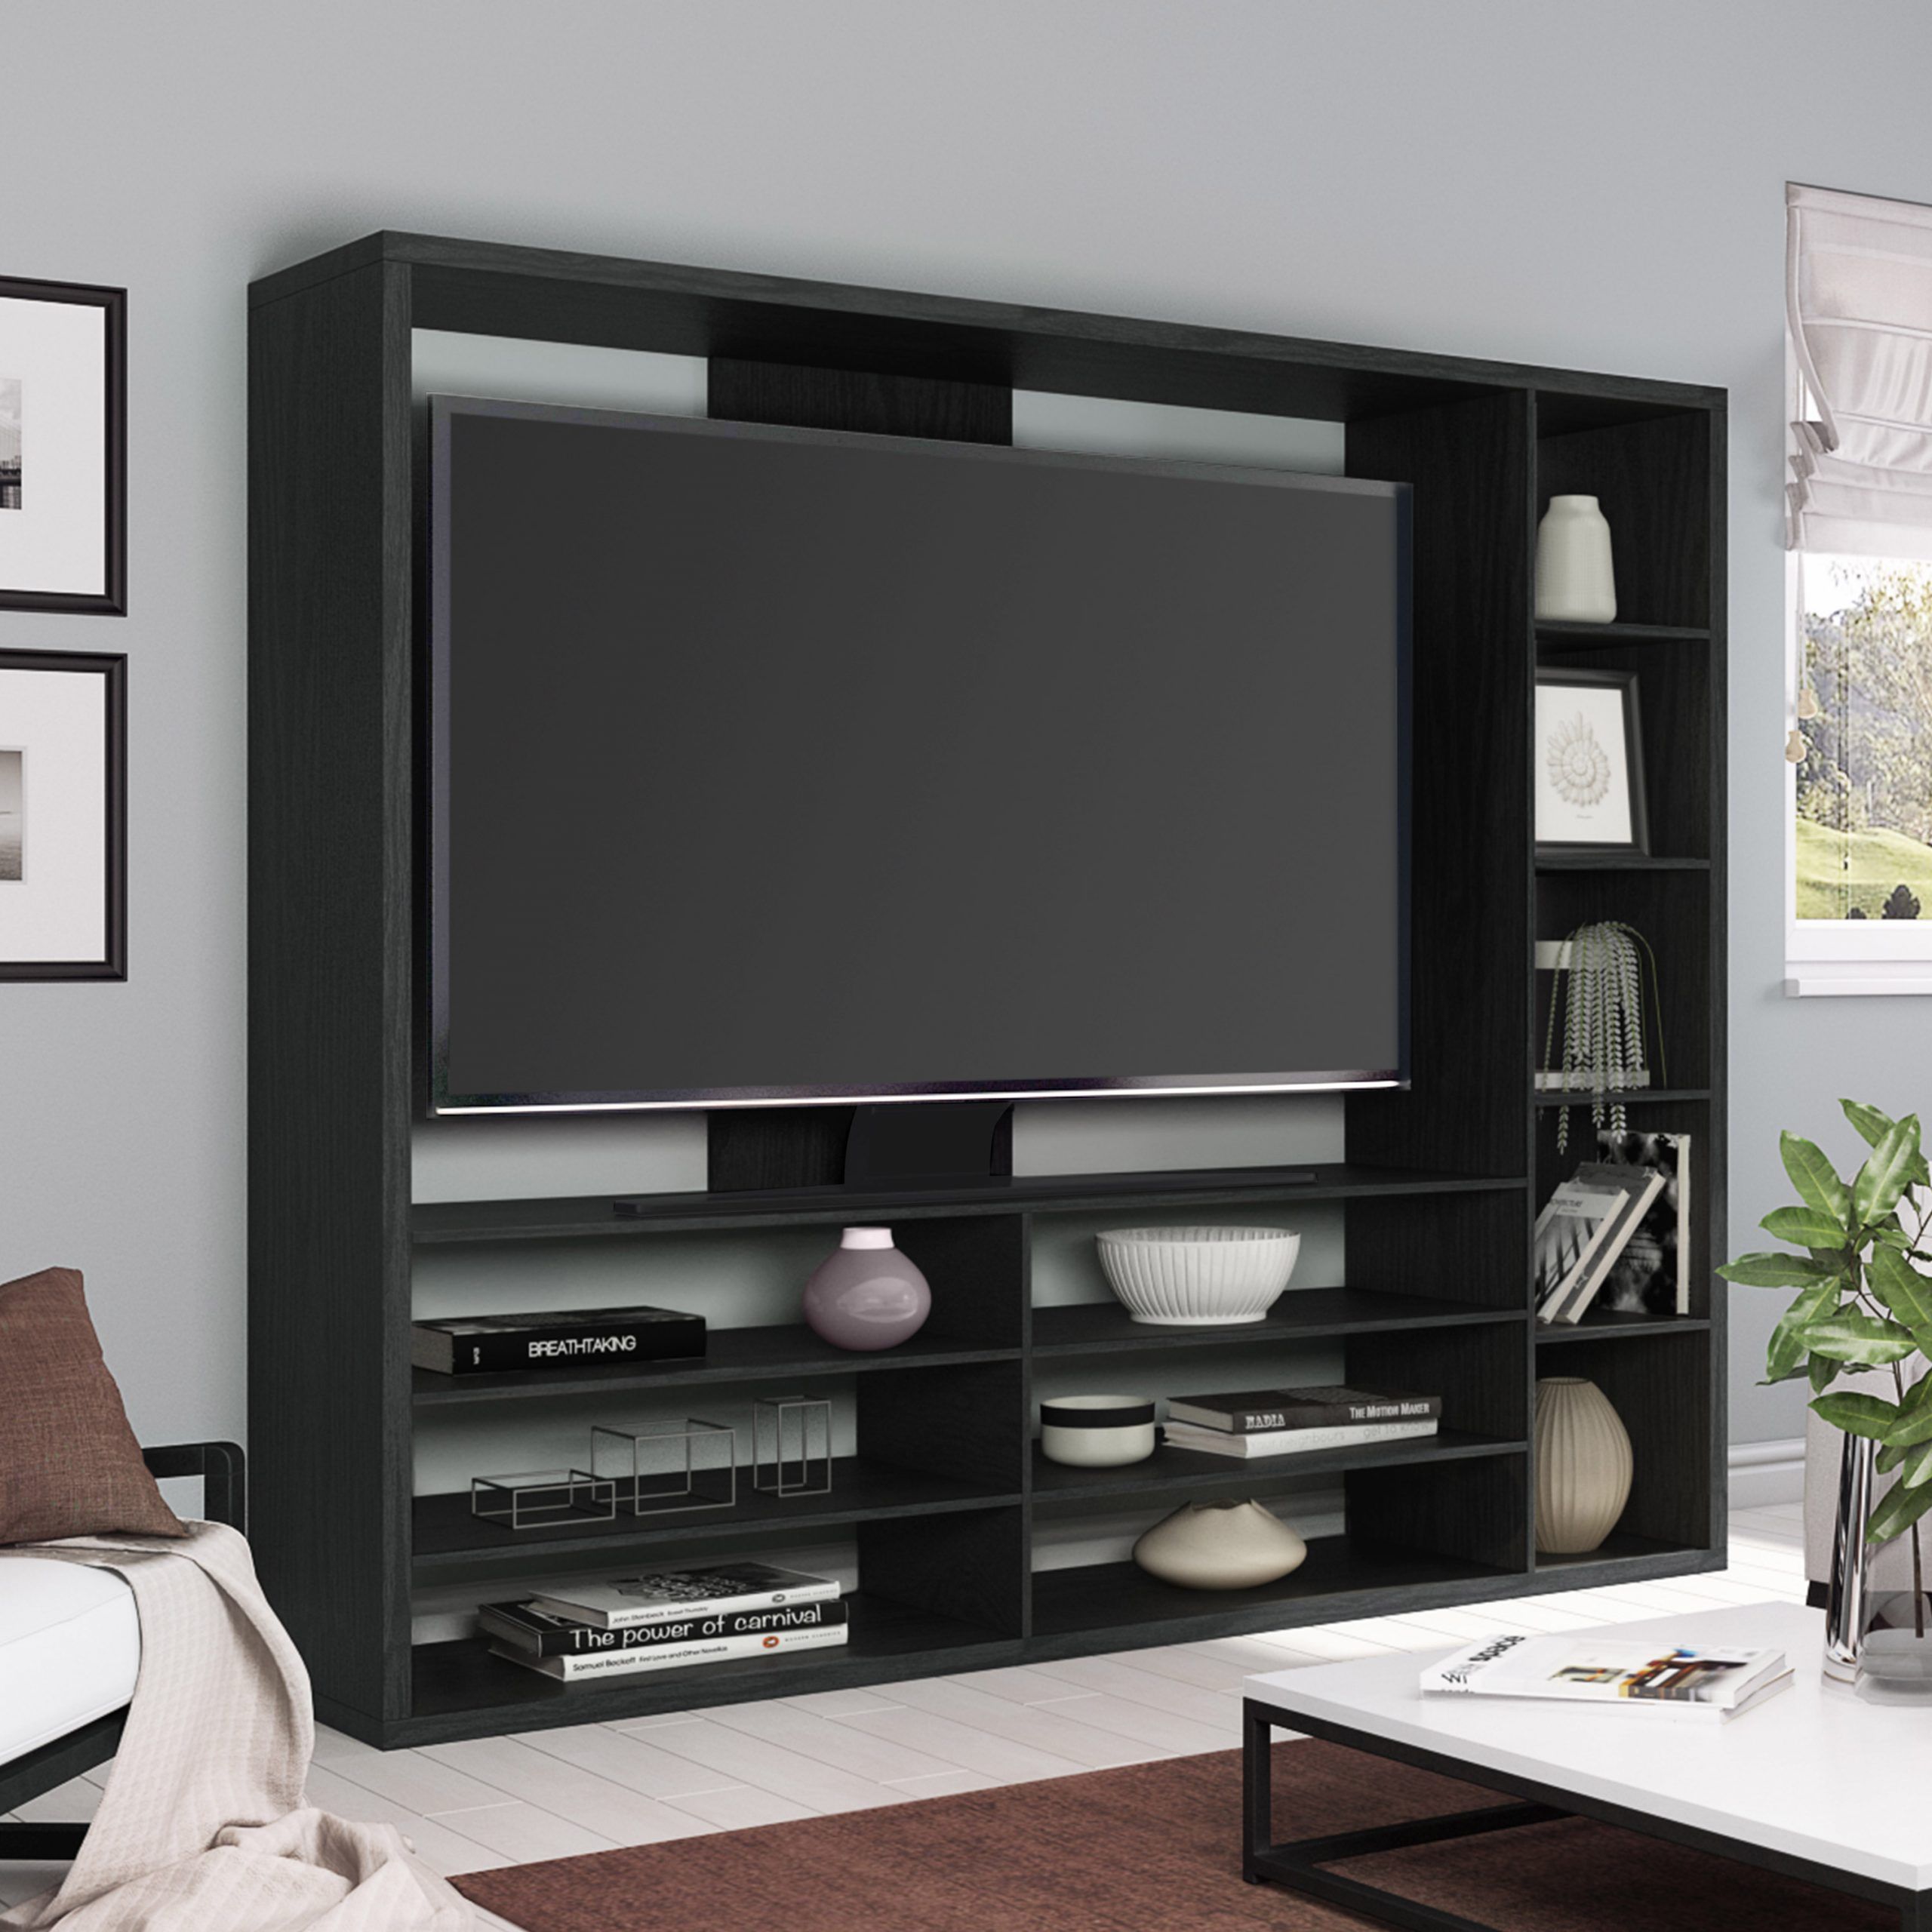 Entertainment Center Vs Tv Stand • Patio Ideas In Beam Through Tv Stand (View 6 of 15)